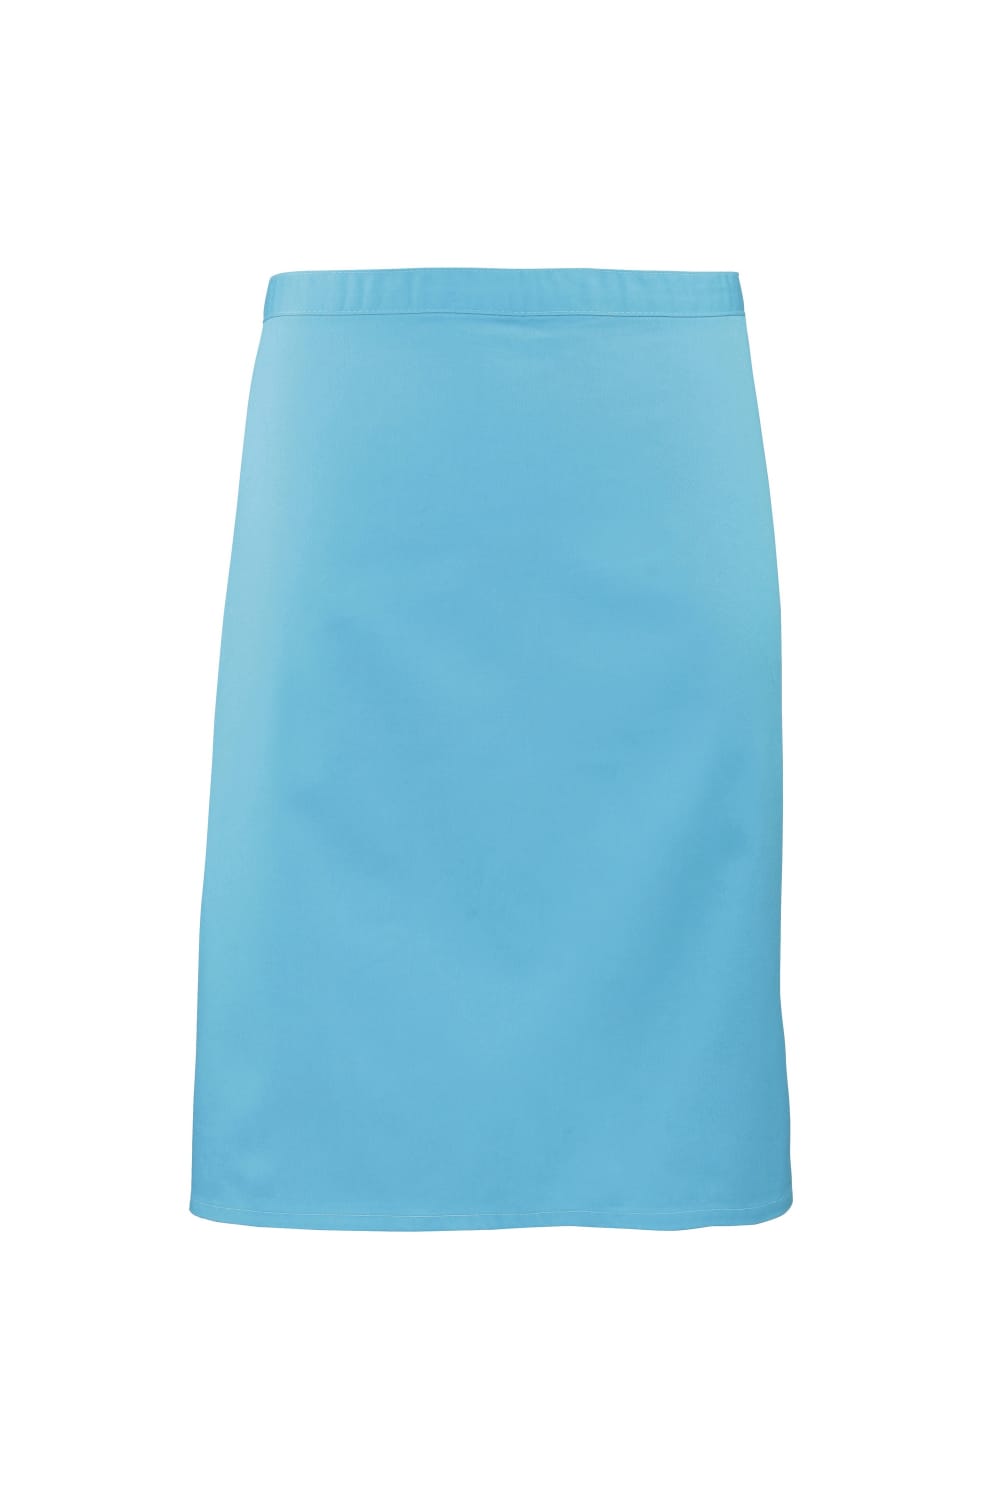 Ladies/Womens Mid-Length Apron (Pack of 2) (Turquoise) (One Size)